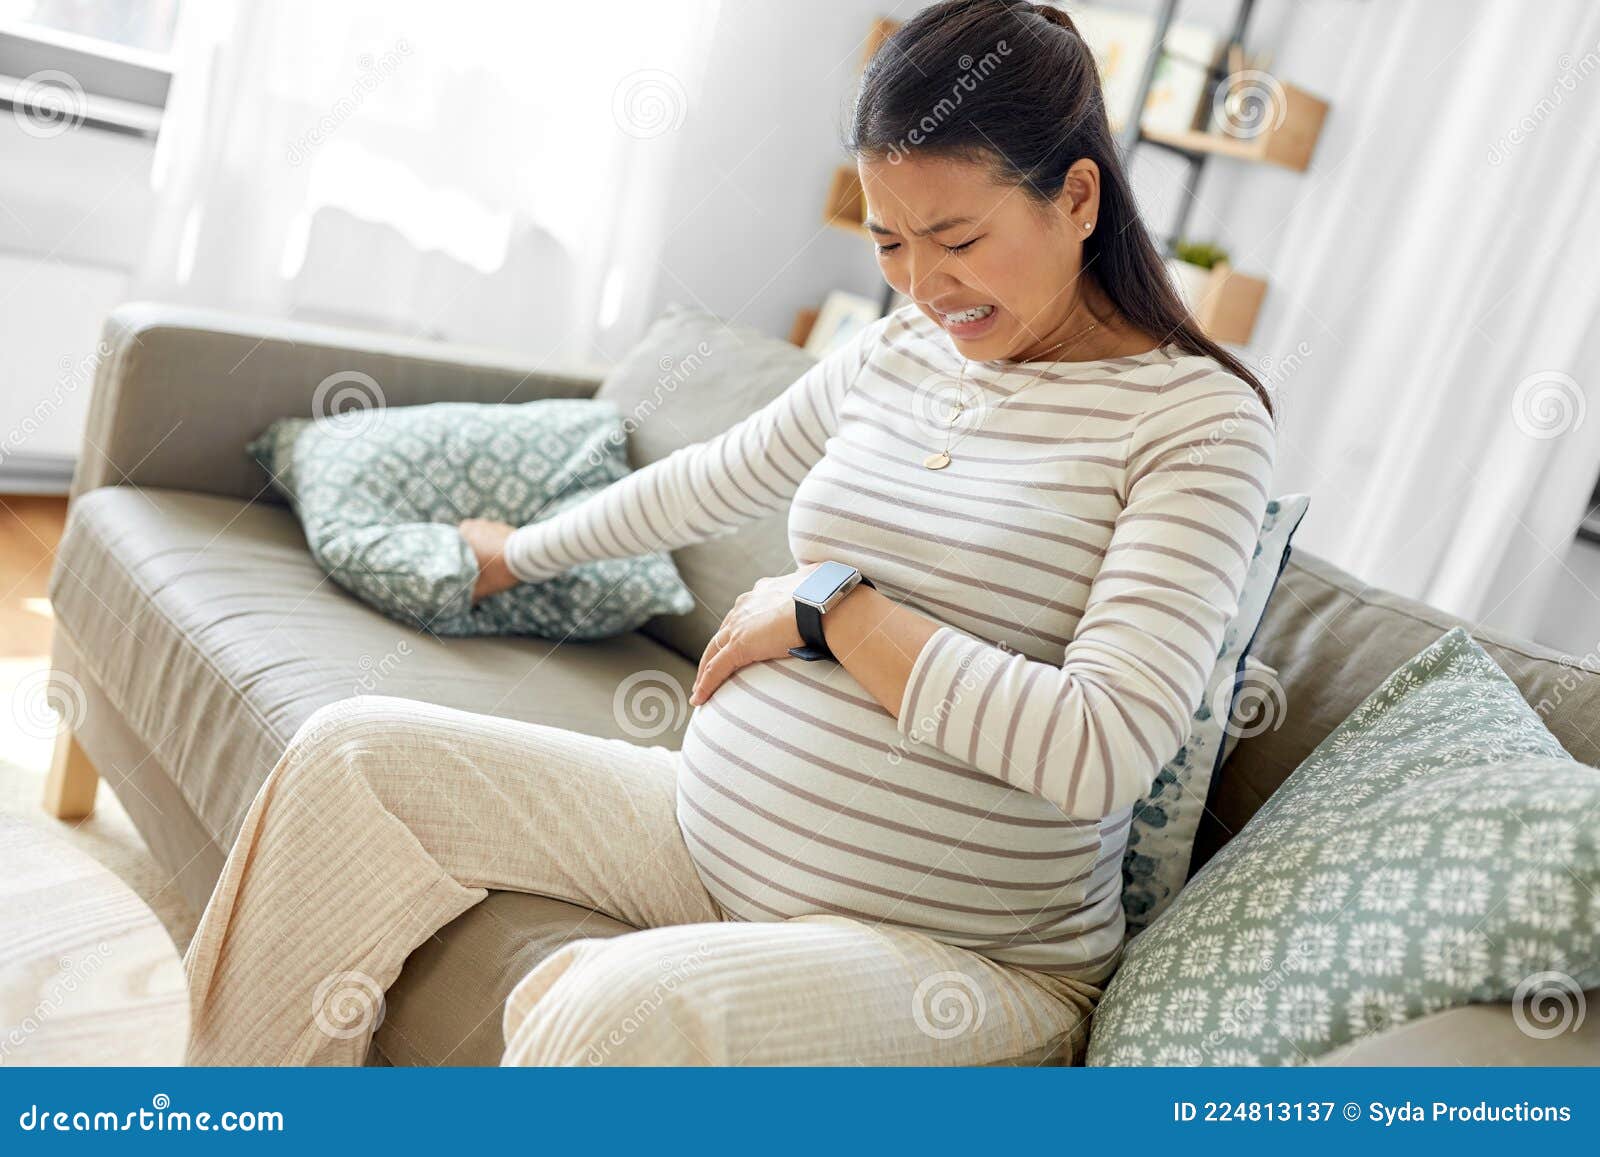 Watch Pregnant